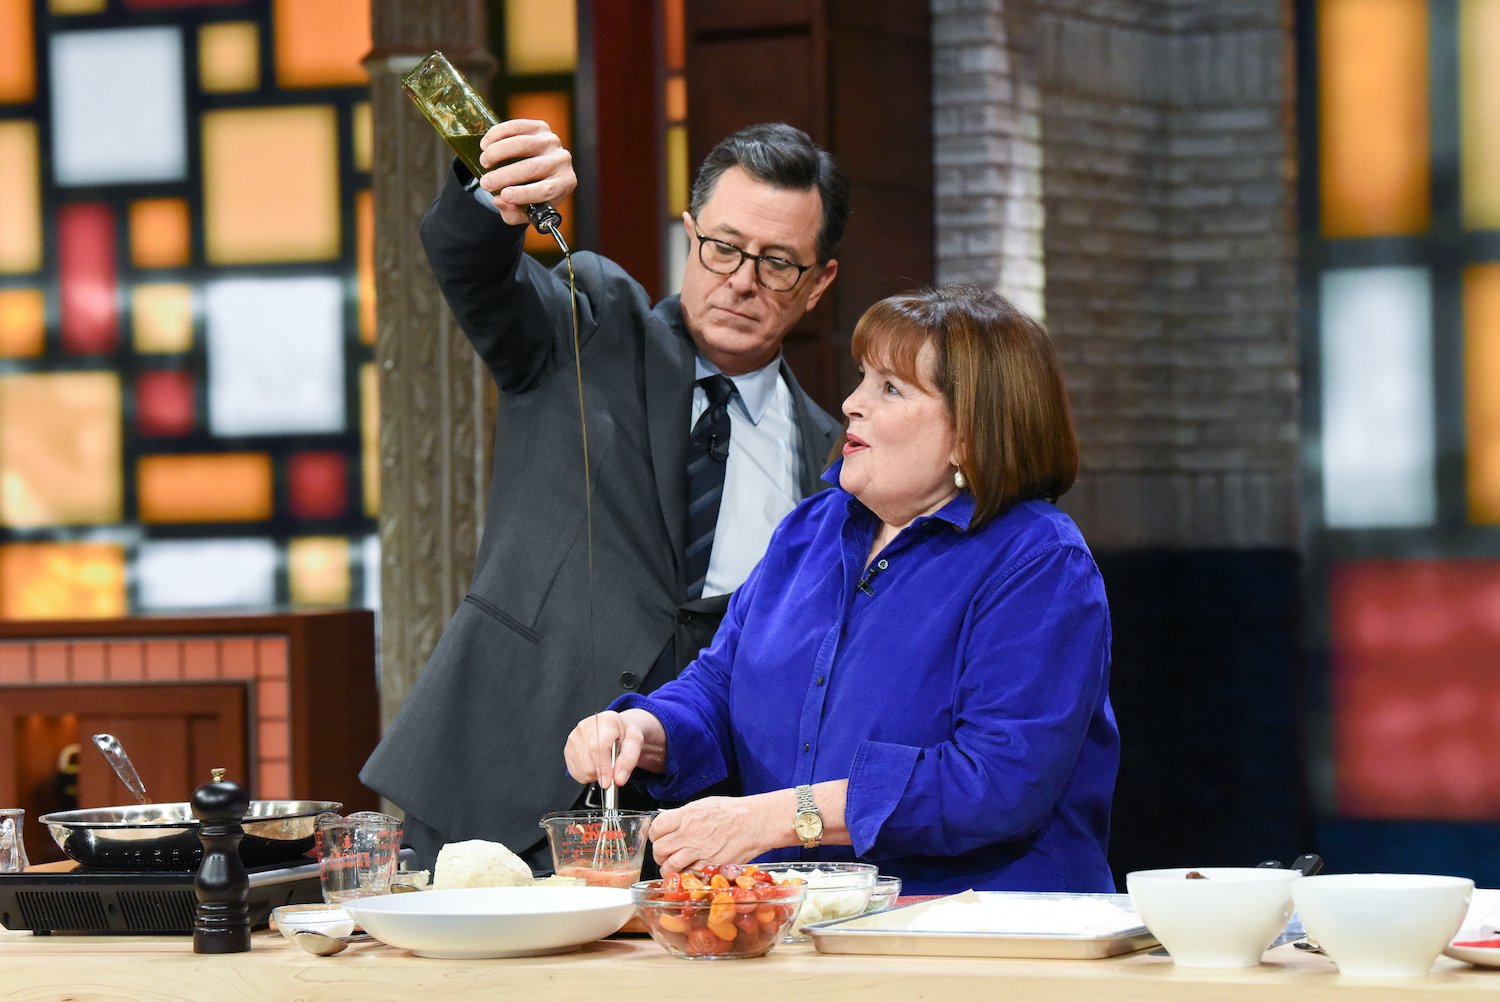 Ina Garten Admits She Was ‘Absolutely Terrified’ on First ‘Barefoot Contessa’ Episode and Still Feels That Fear 20 Years Later